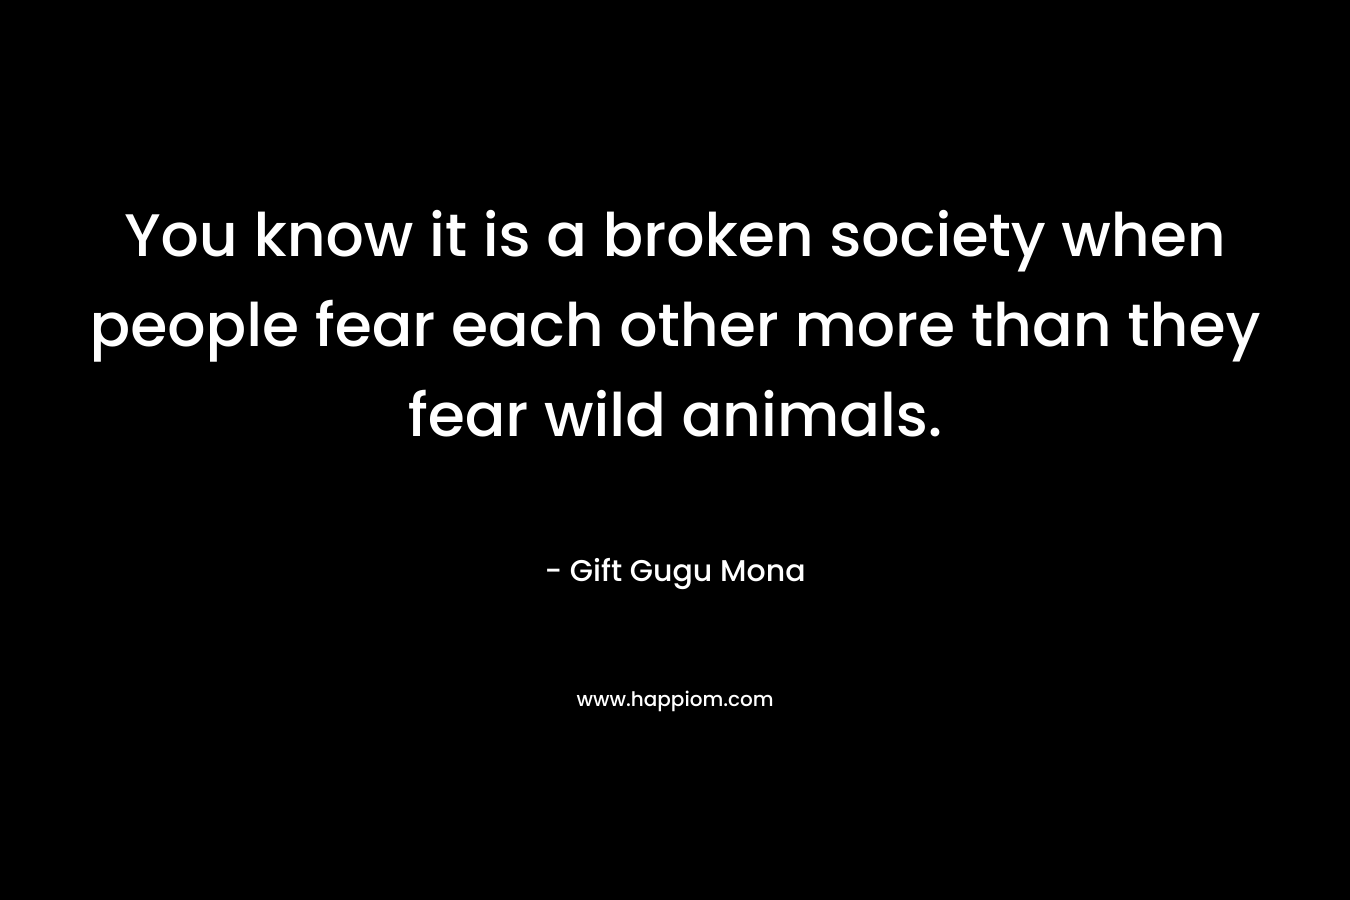 You know it is a broken society when people fear each other more than they fear wild animals.